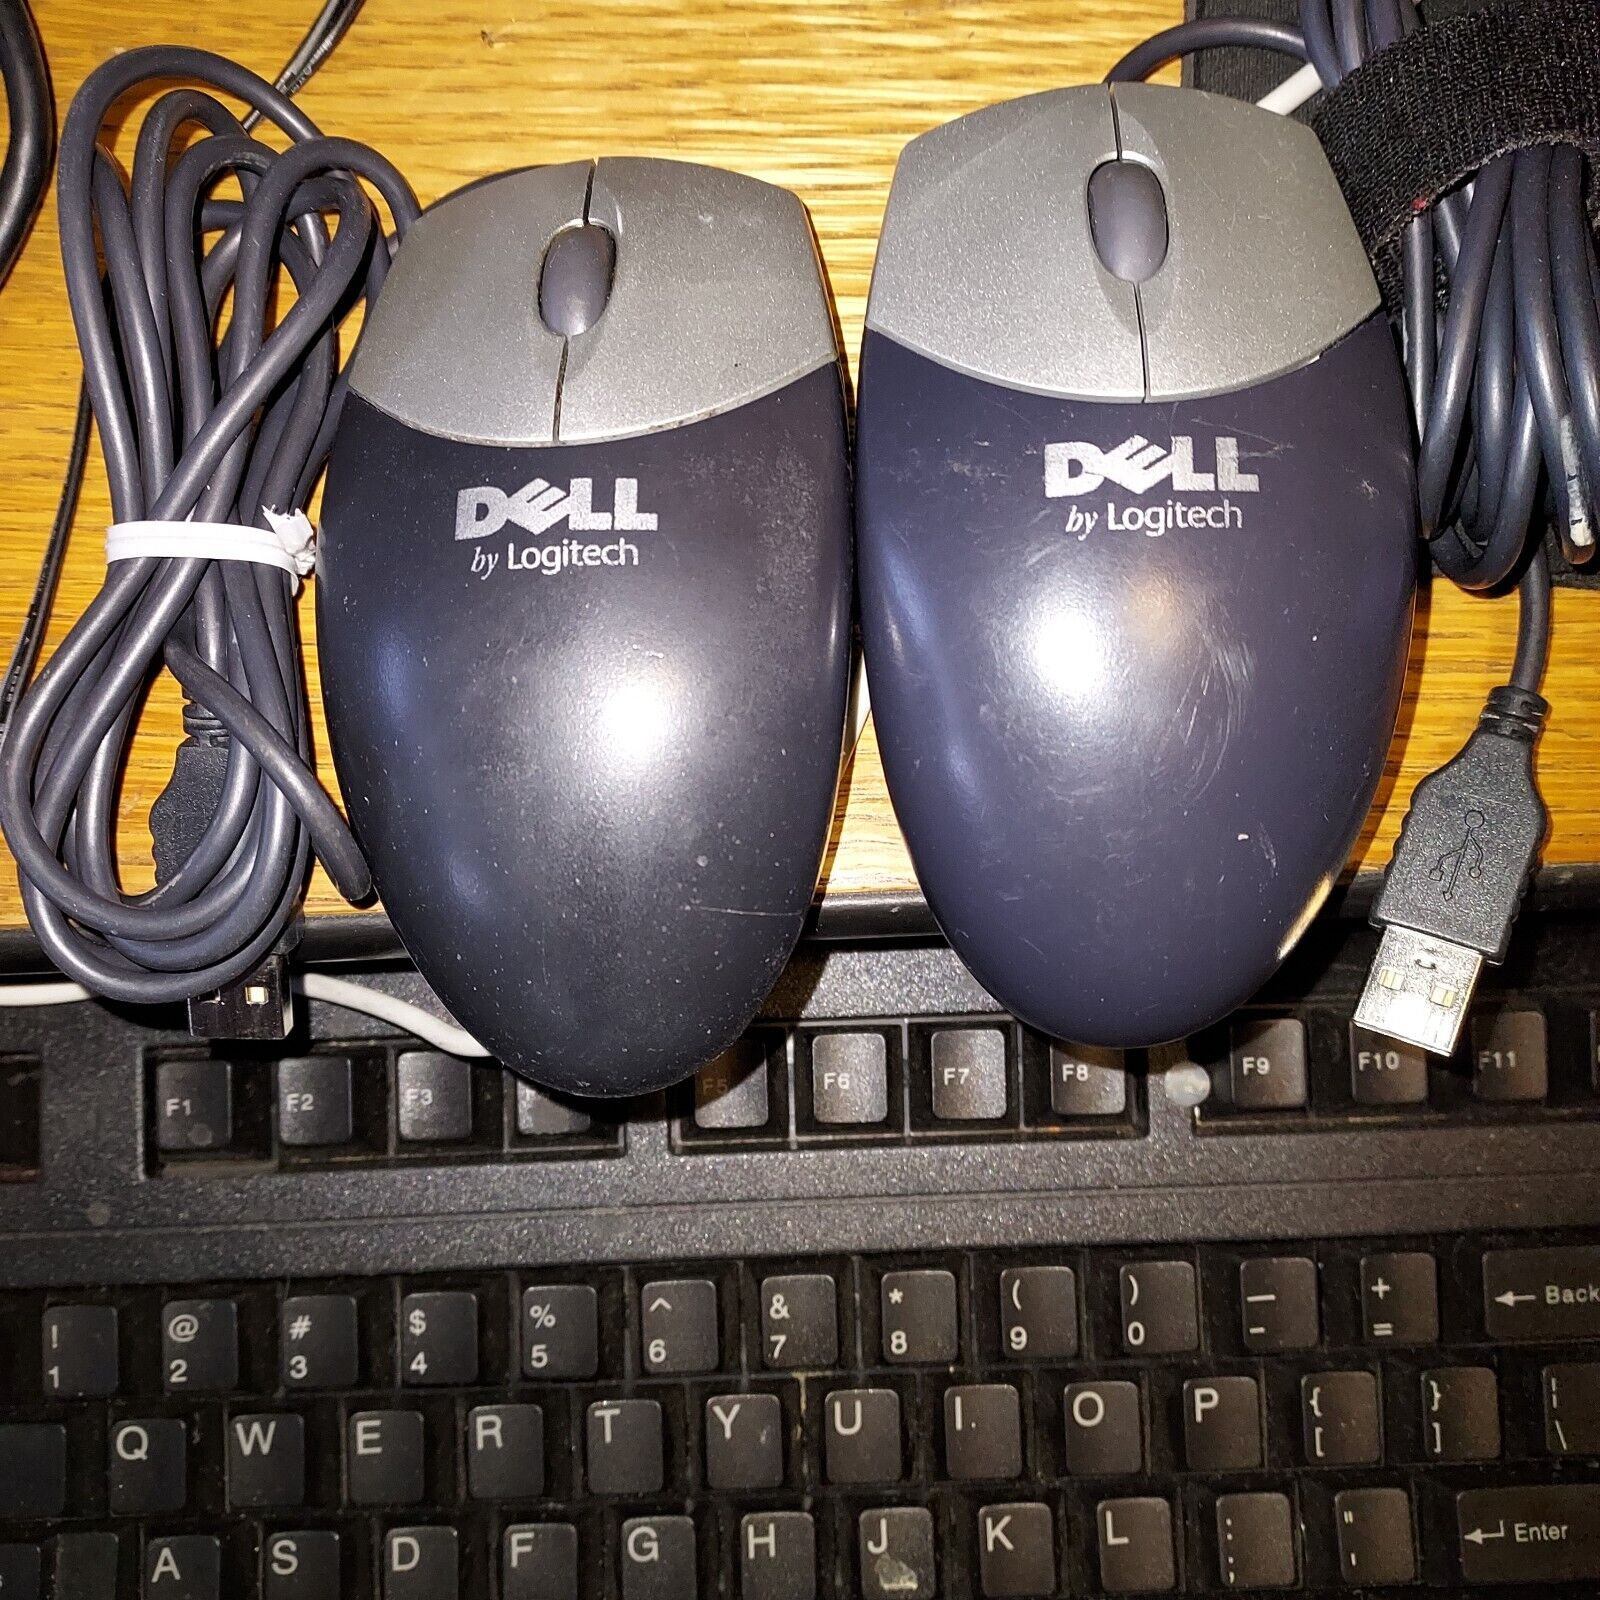 DELL BY Logitech Black and Silver USB ROLLER BALL MOUSE